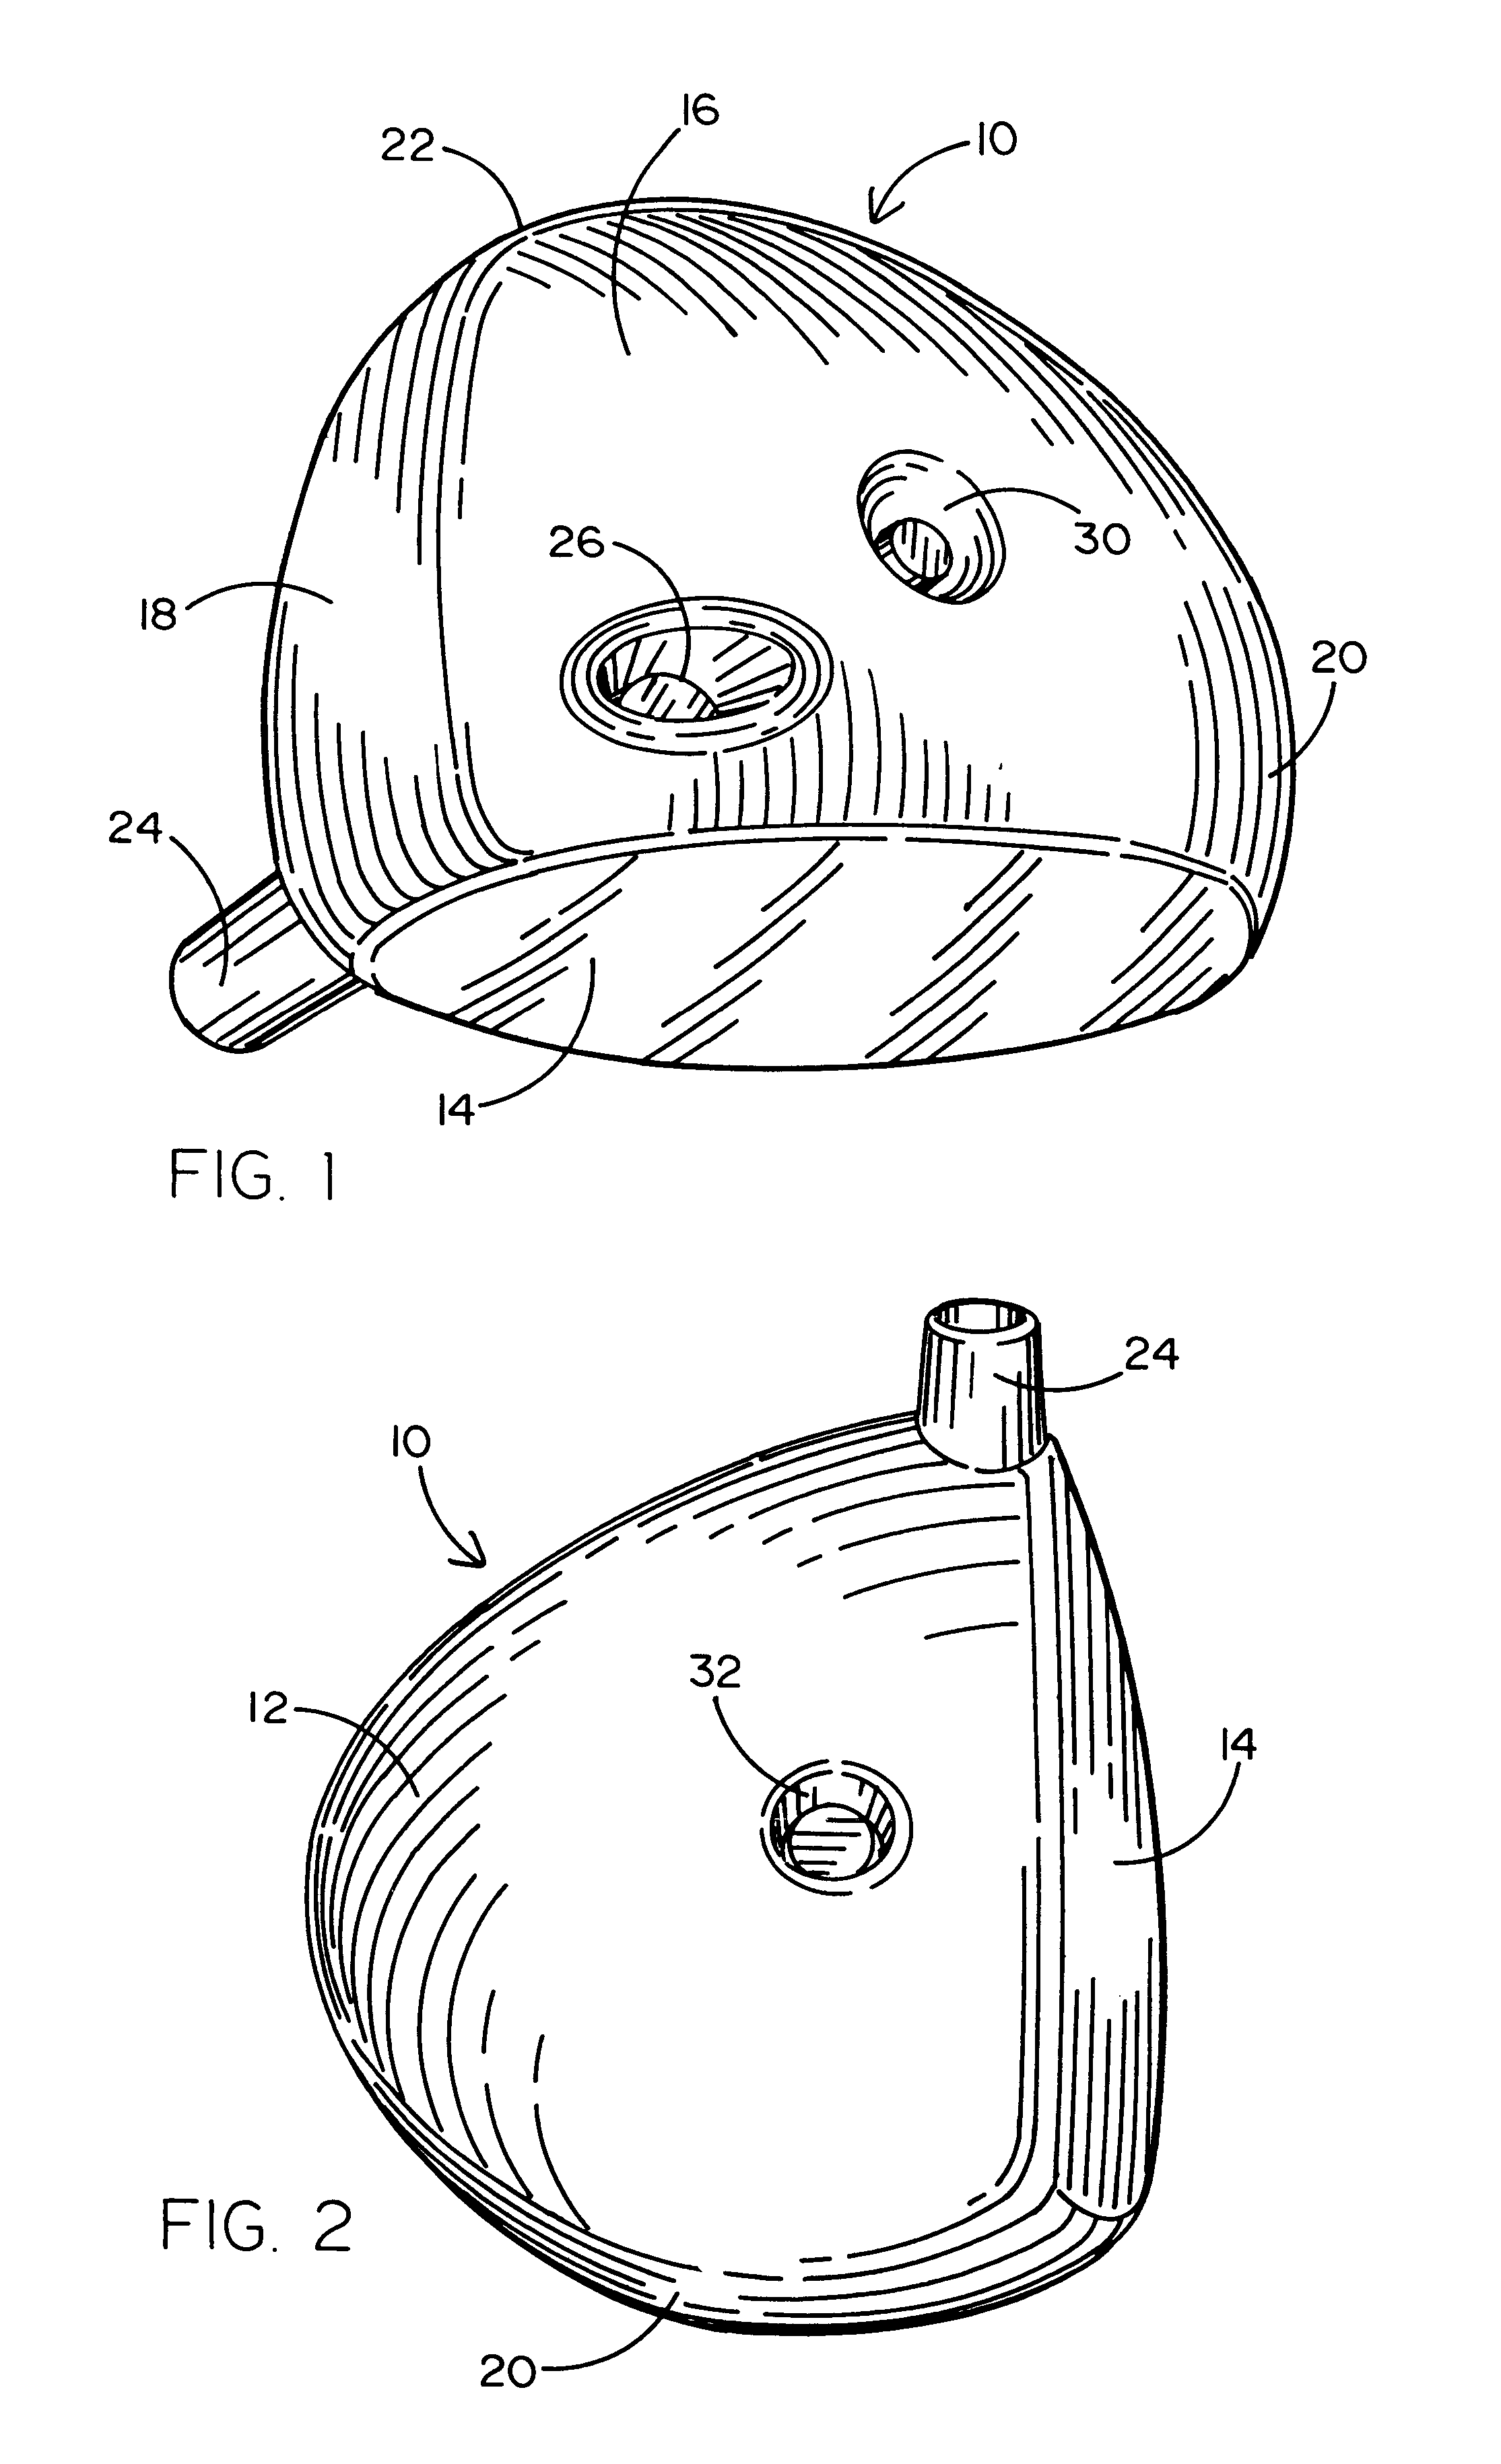 Golf club head having a device for resisting expansion between opposing walls during ball impact